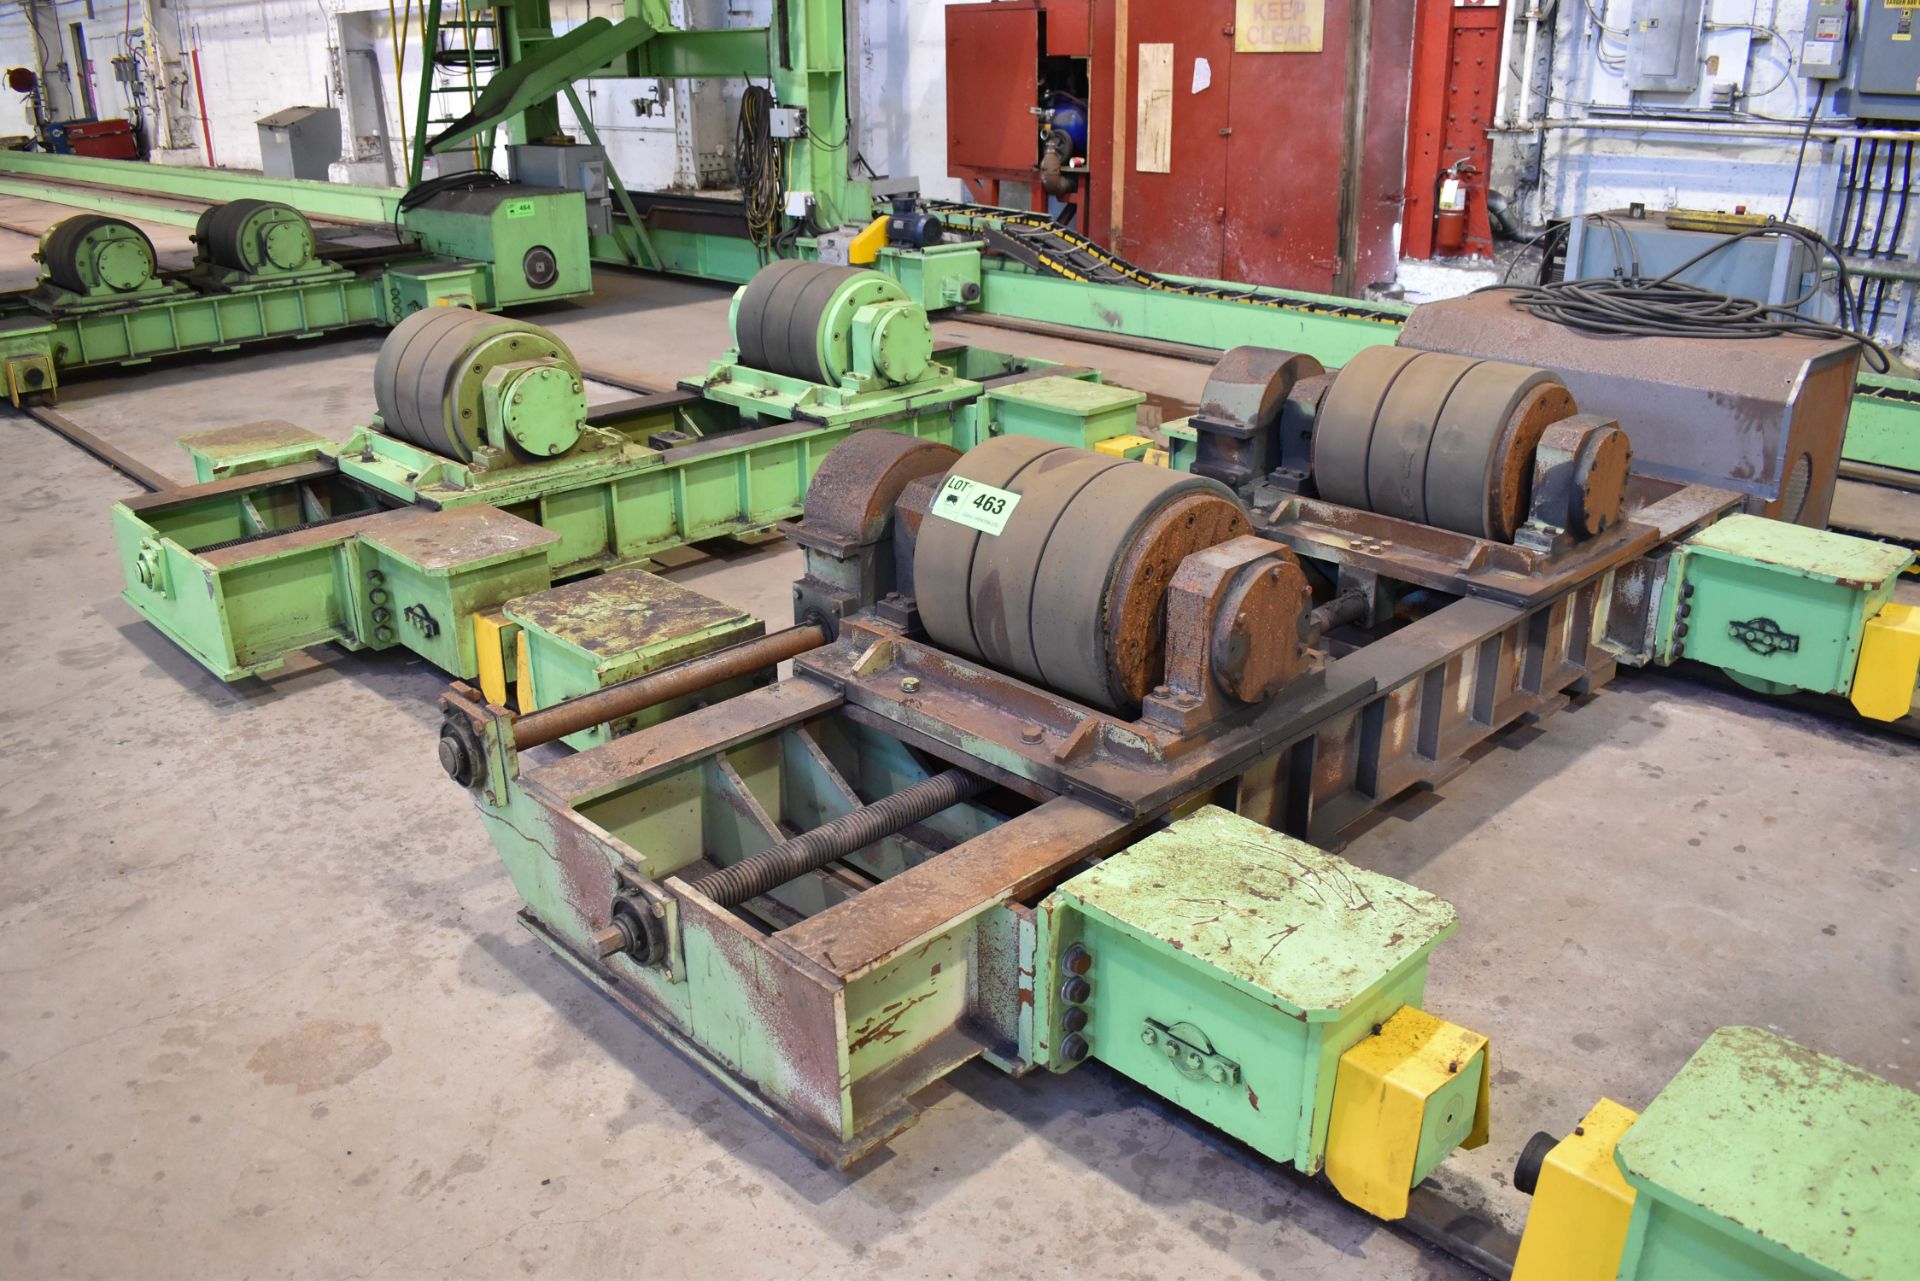 JONGHAP (2011) STR-100/50, 100 TON CAPACITY DRIVER & IDLER TURNING ROLL SETS WITH 17.70" URETHANE